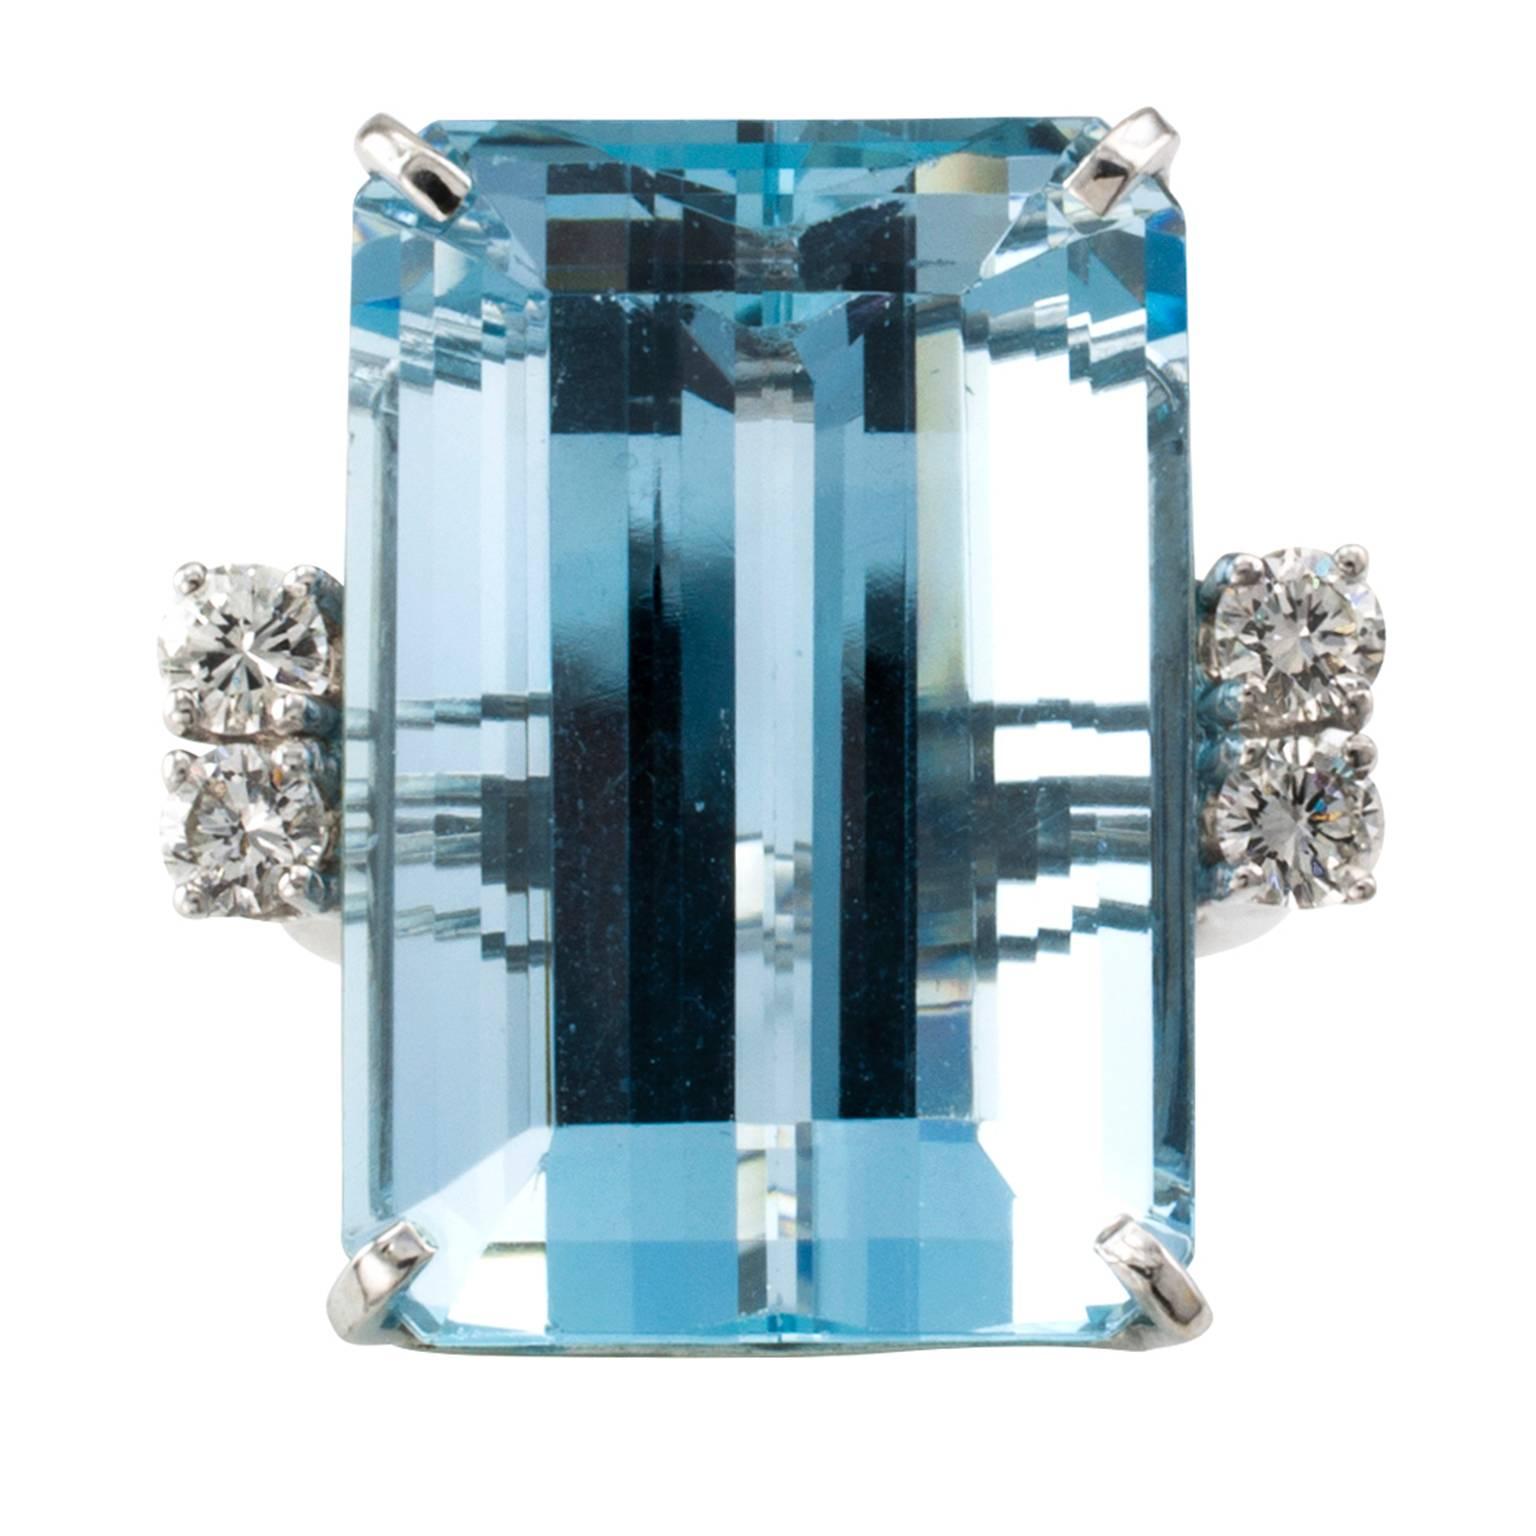 30.00 Carats Aquamarine and Diamond Cocktail Ring Circa 1950

Approximately 30.00 carats packed into a dramatic emerald cut aquamarine with beautiful blue color and brilliance.  Mounted in 14 karat white gold in a design embellished with four